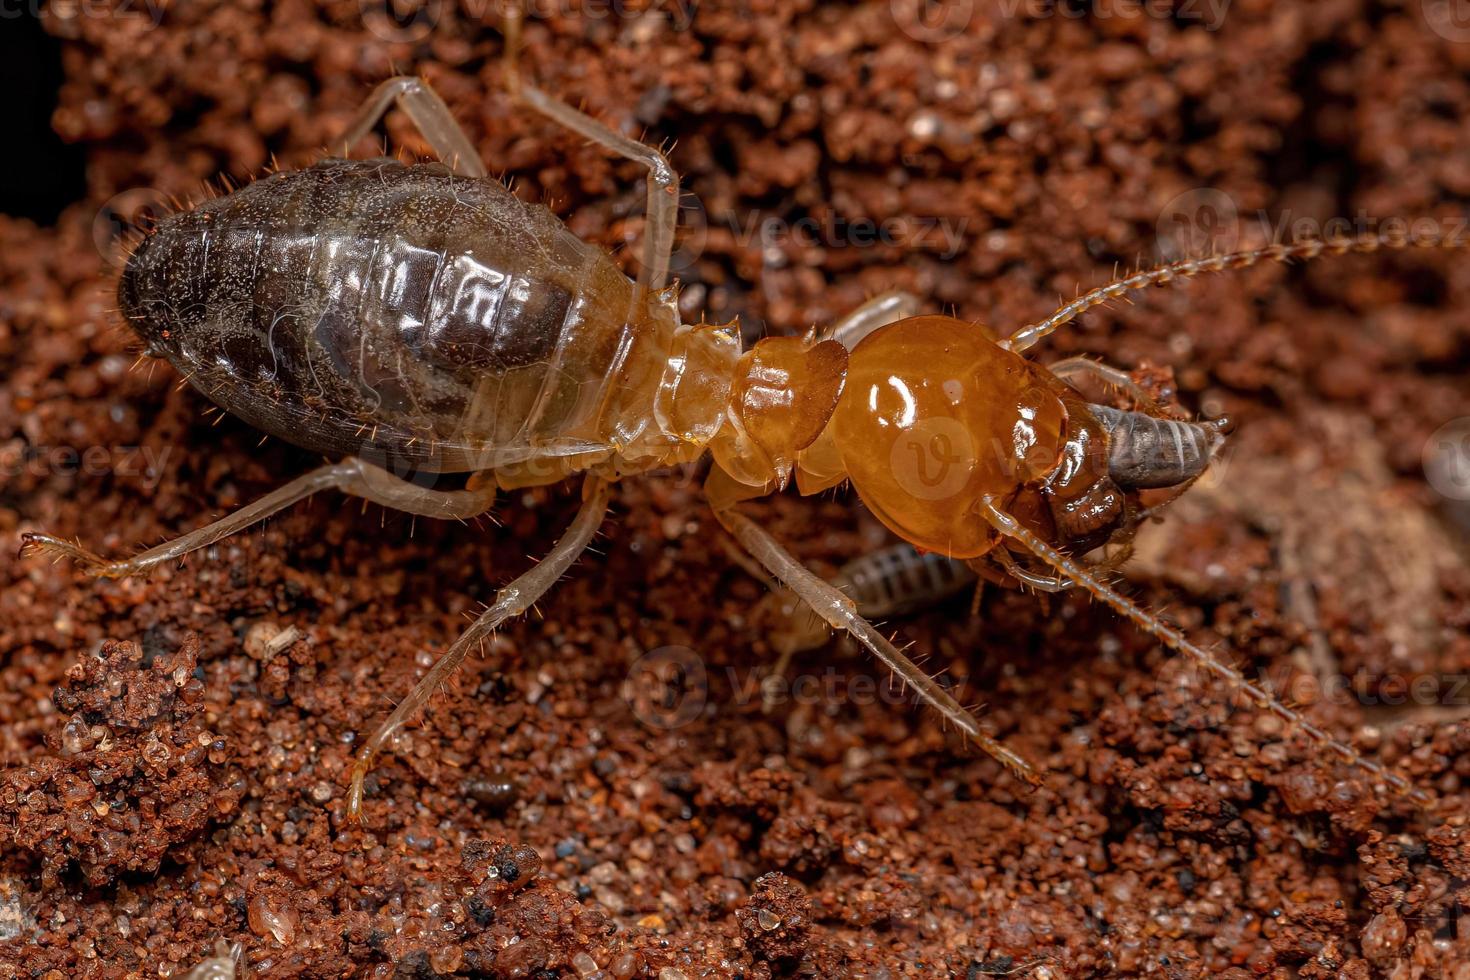 Adult Jawsnouted Termite preying on smaller termites photo